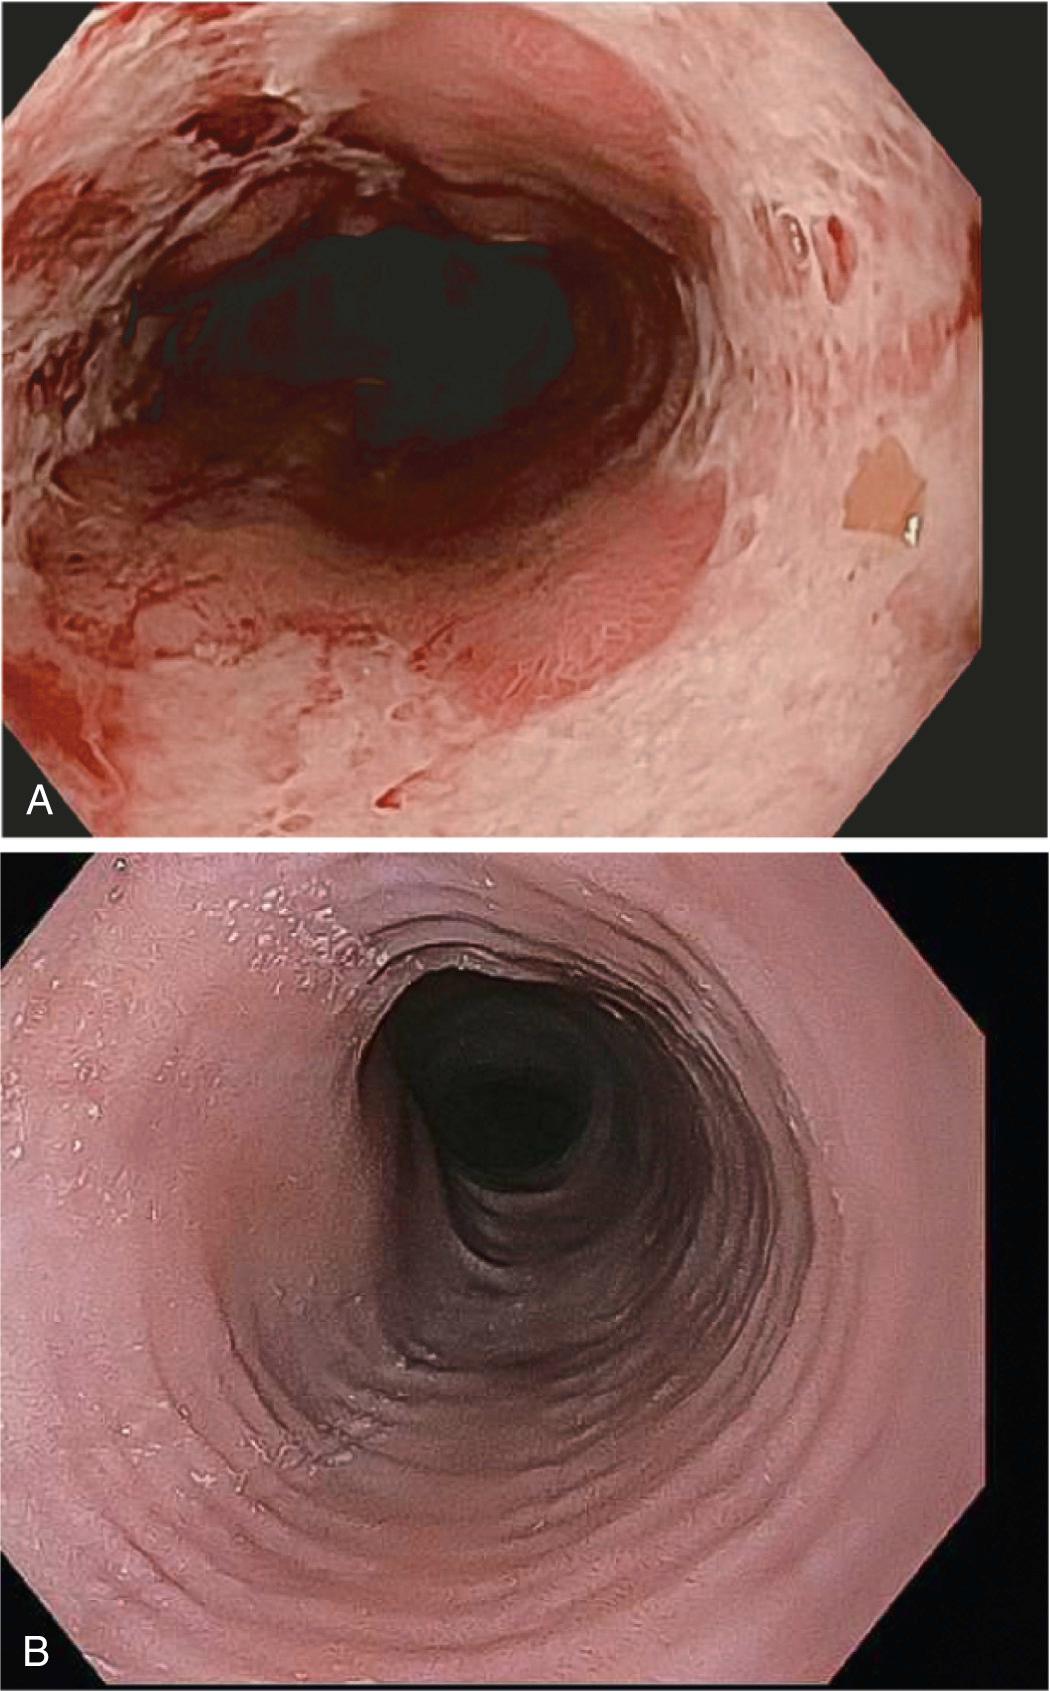 Figure 17.5, Esophagitis. (A) Endoscopic view of reflux esophagitis with multiple erosions within the squamous-lined esophagus, a metaplastic zone (Barrett esophagus, discussed later), and distal gastric mucosa. Note the tan islands of metaplastic epithelium within the white squamous mucosa. (B) The “feline” or “ringed” endoscopic appearance of the esophagus is typical of eosinophilic esophagitis.